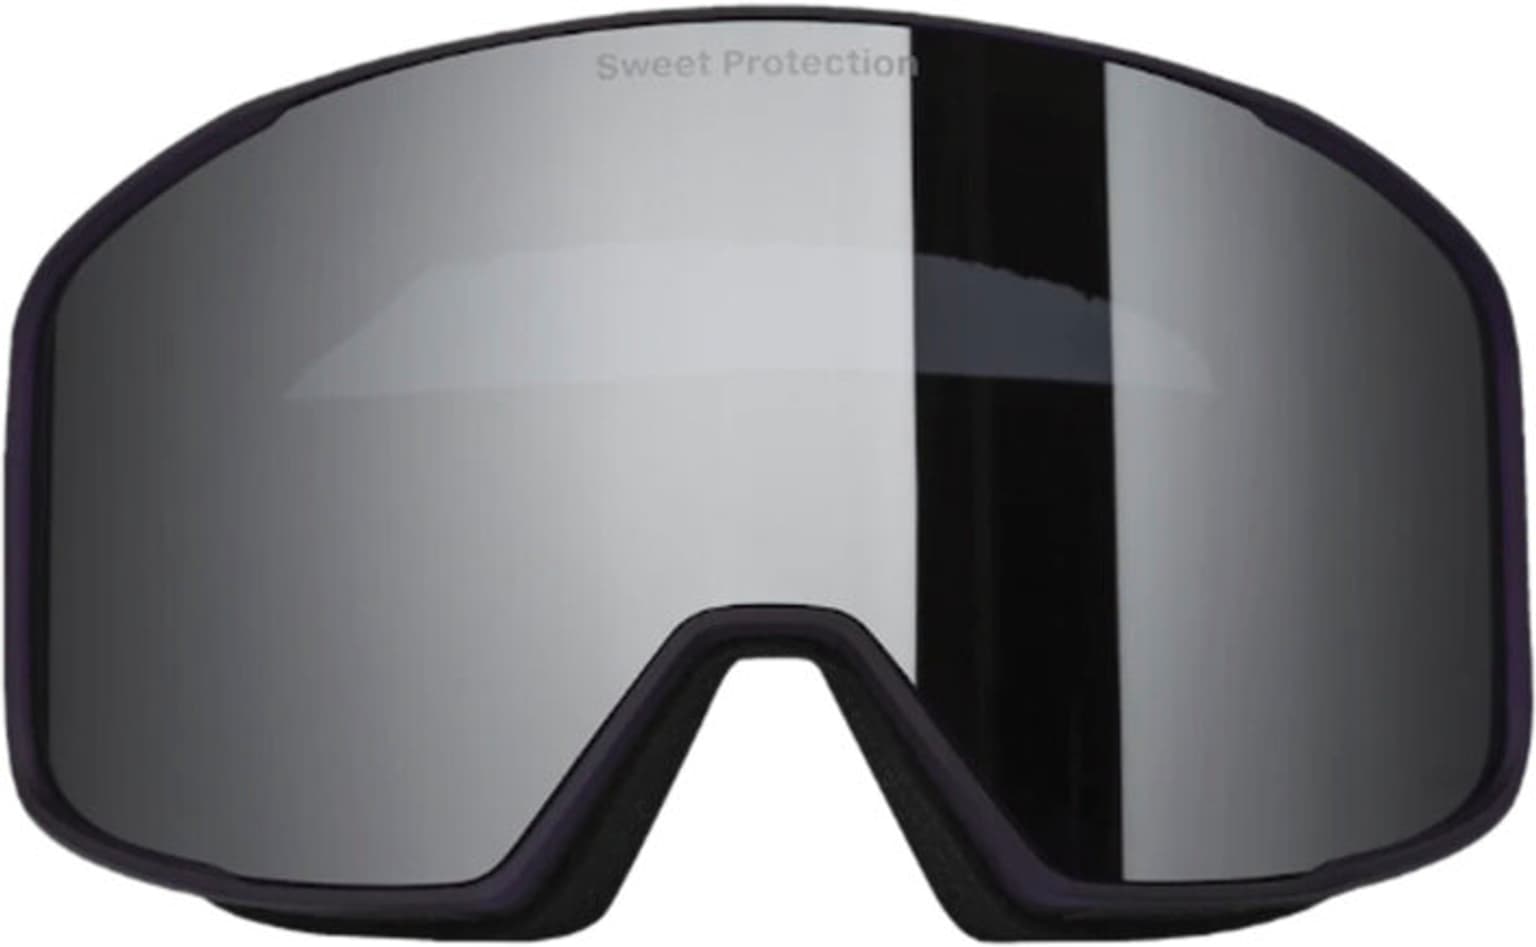 Sweet Protection Sweet Protection Boondock RIG Reflect Skibrille dunkelviolett 2